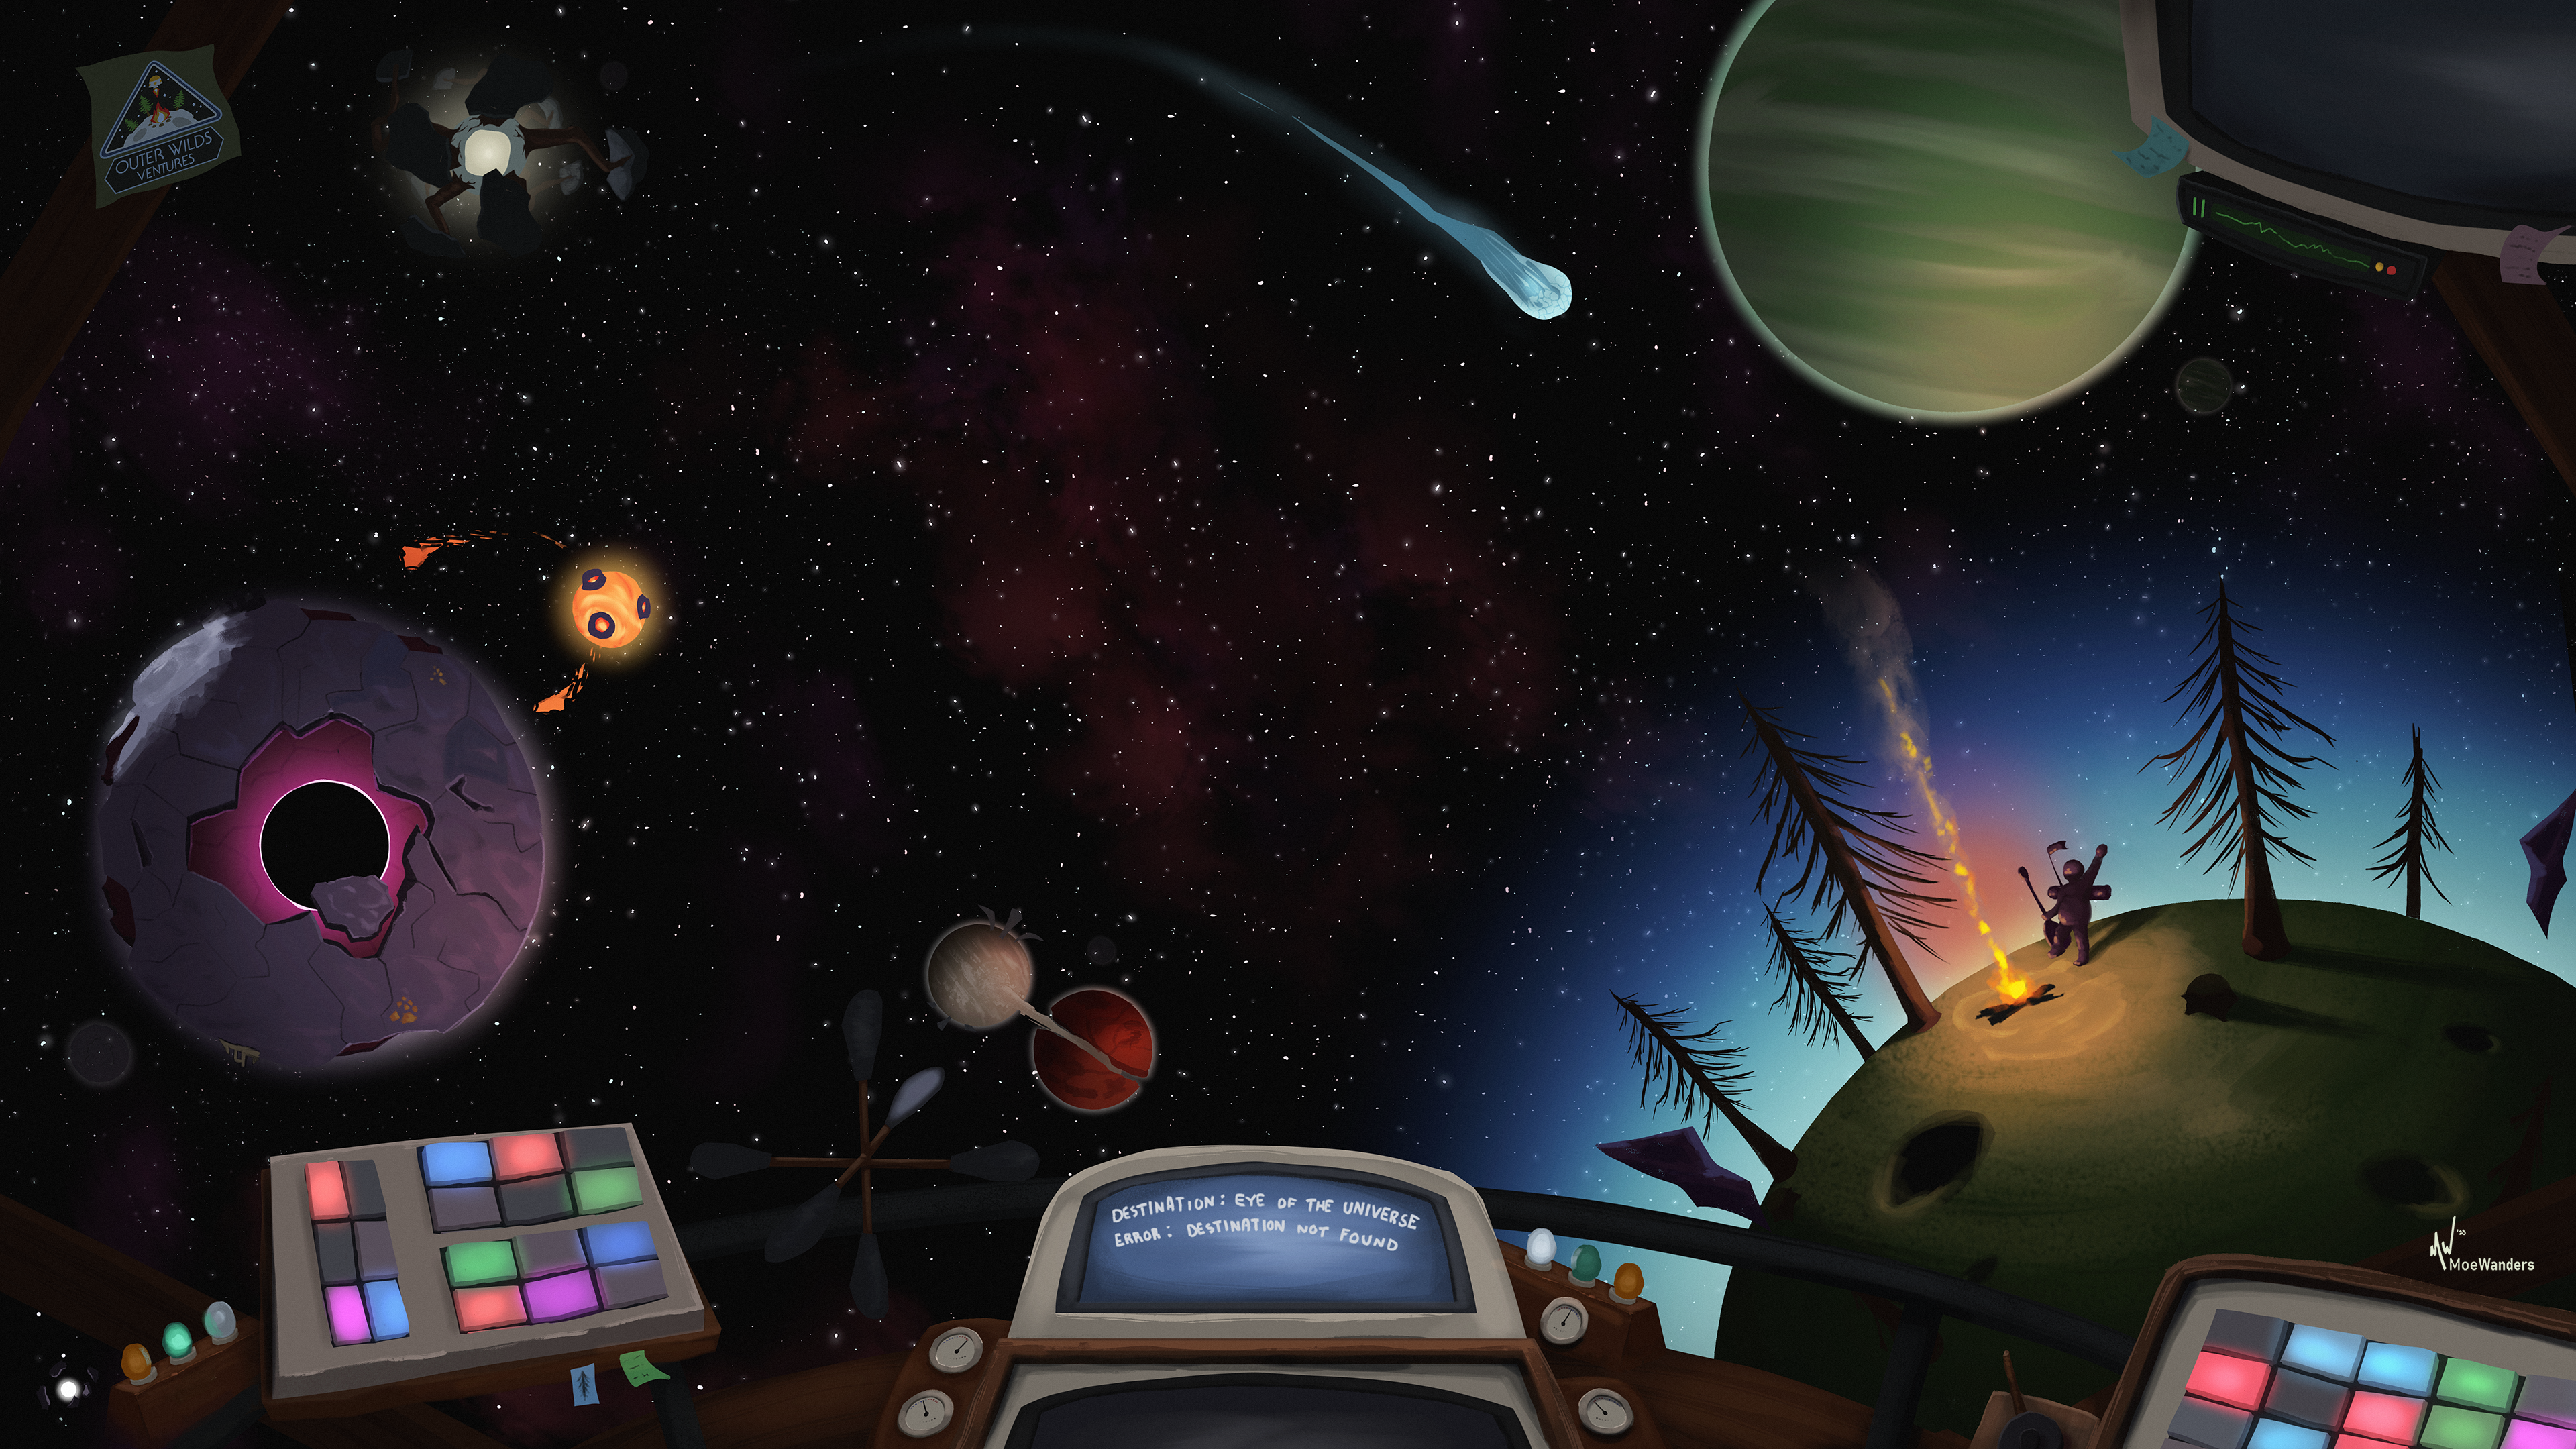 Outer Wilds Ventures